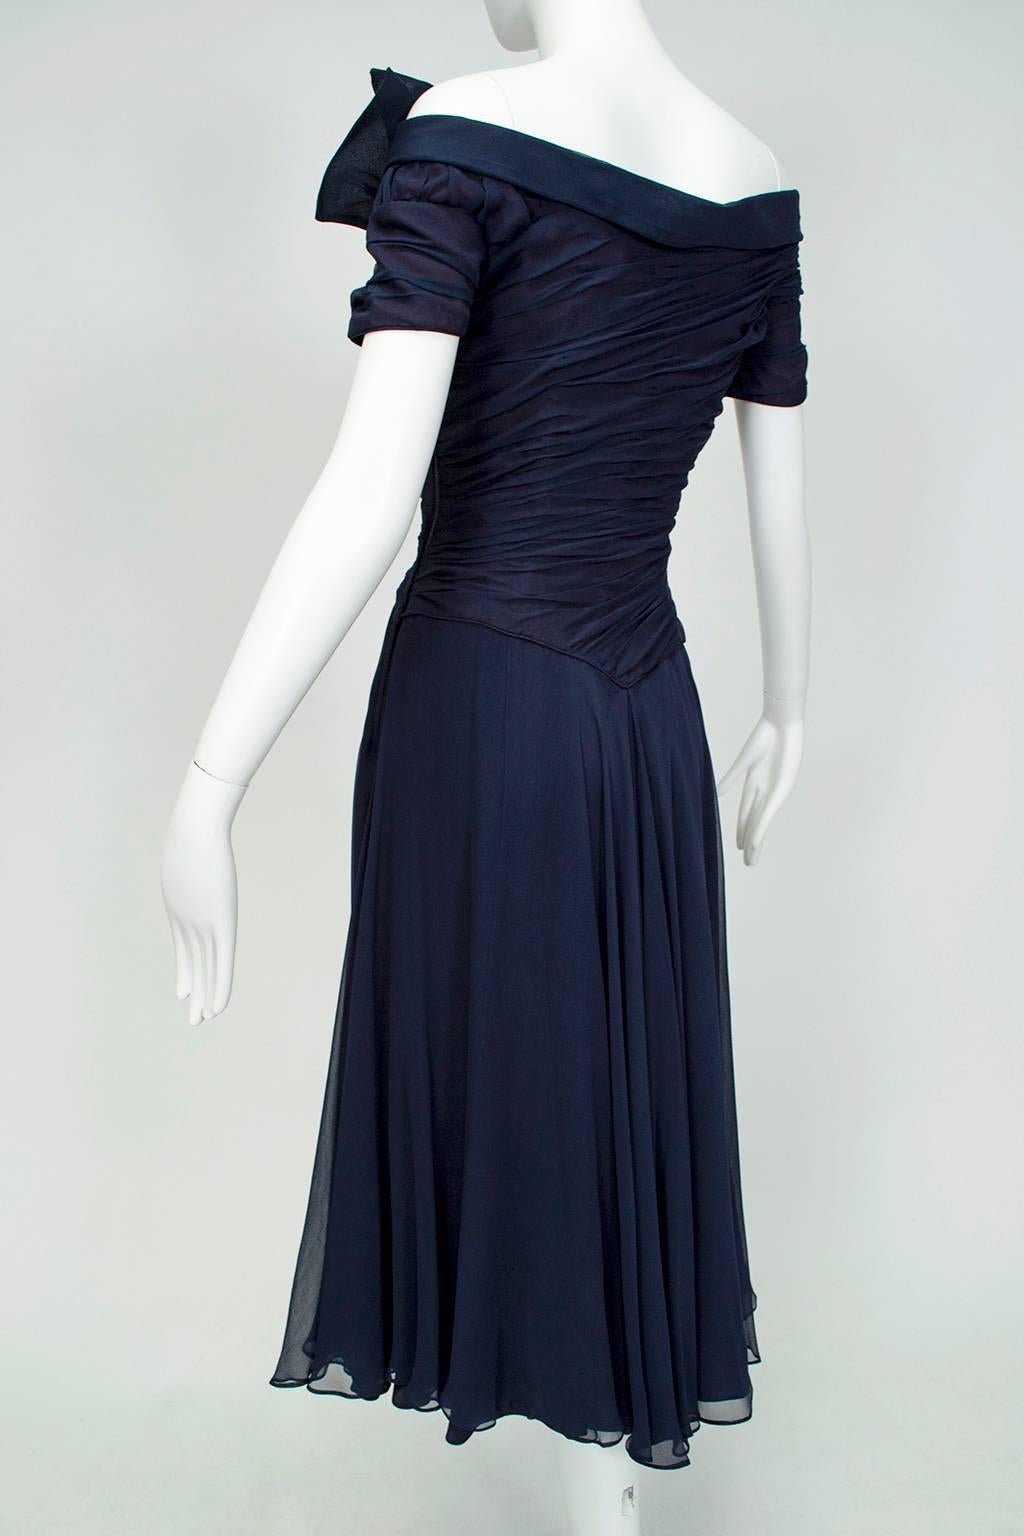 Ceil Chapman Navy Chiffon Portrait Collar Dress with Shoulder Bow - Med, 1950s In Good Condition For Sale In Tucson, AZ